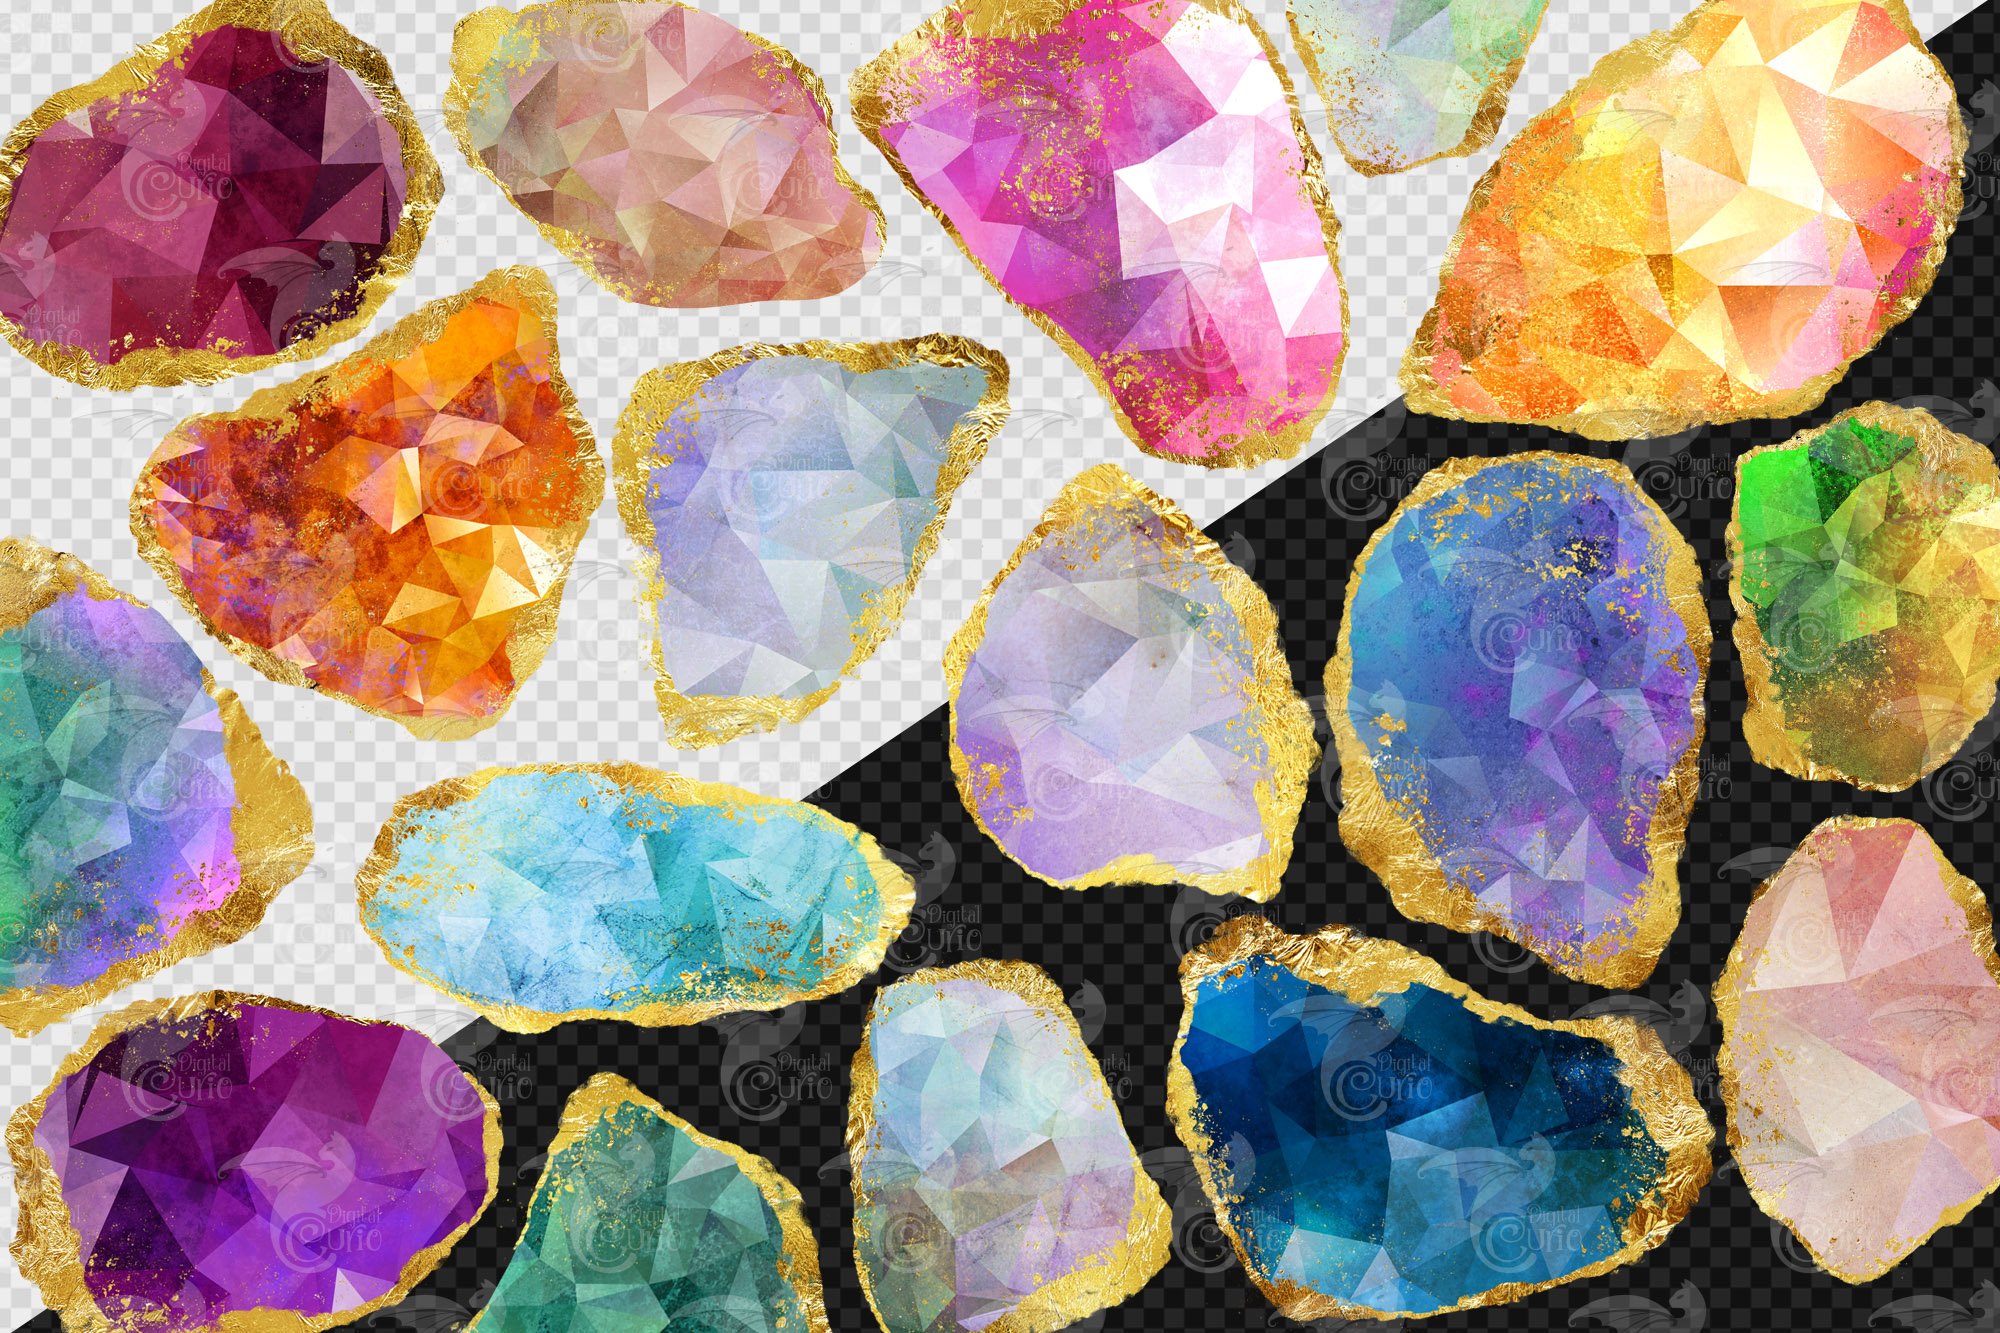 Crystallic Gold Jewels Clipart preview image.